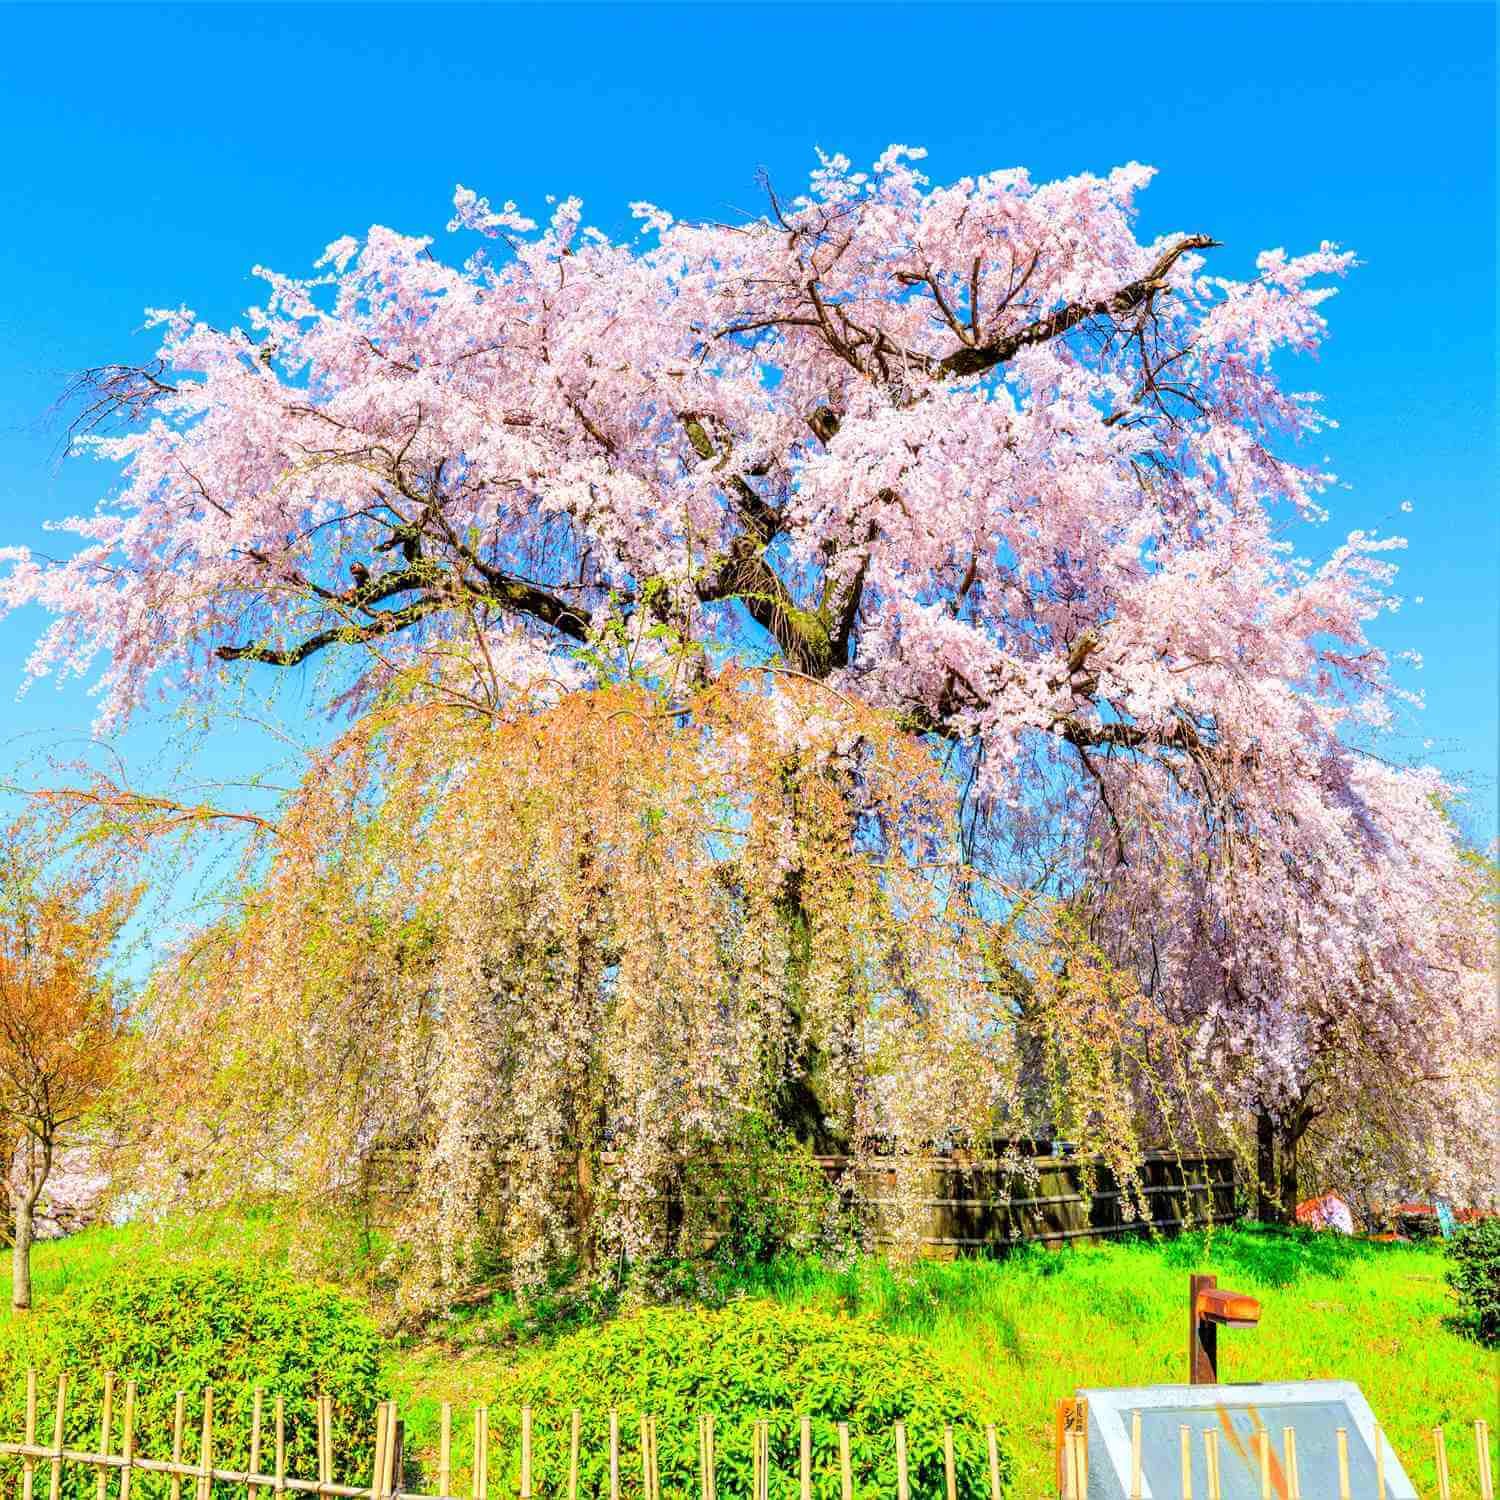 Cherry blossoms in Kyoto = Shutterstock 6